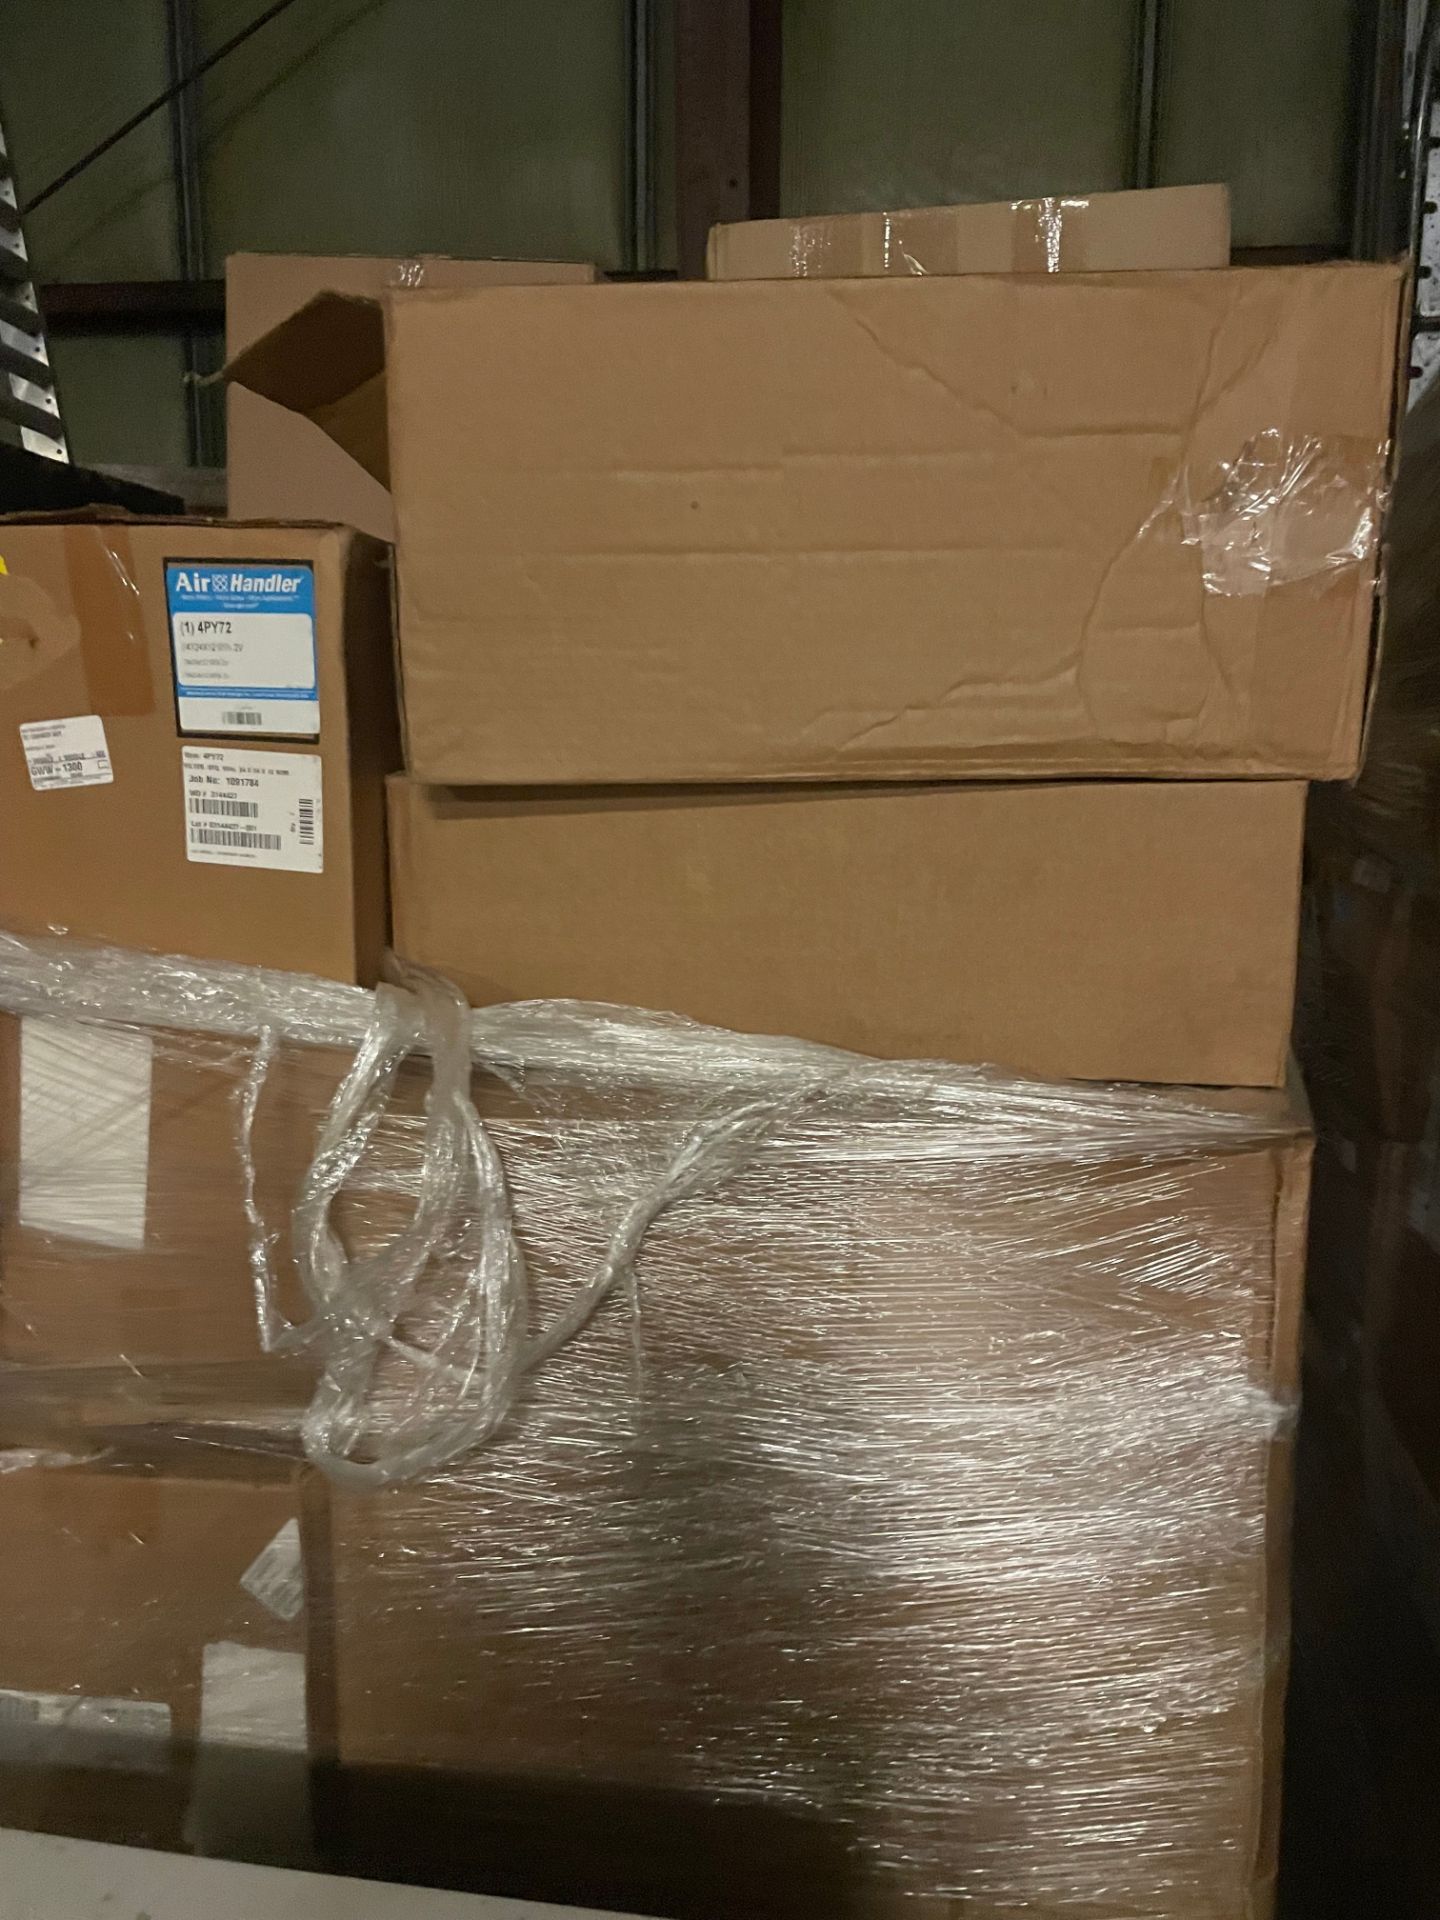 Whole 4 pallets, 137 air filters: New filters. Grainger#: 2DBW2; 11Z801(6); 2GHT1(2); 2GGW3(3); - Image 2 of 5